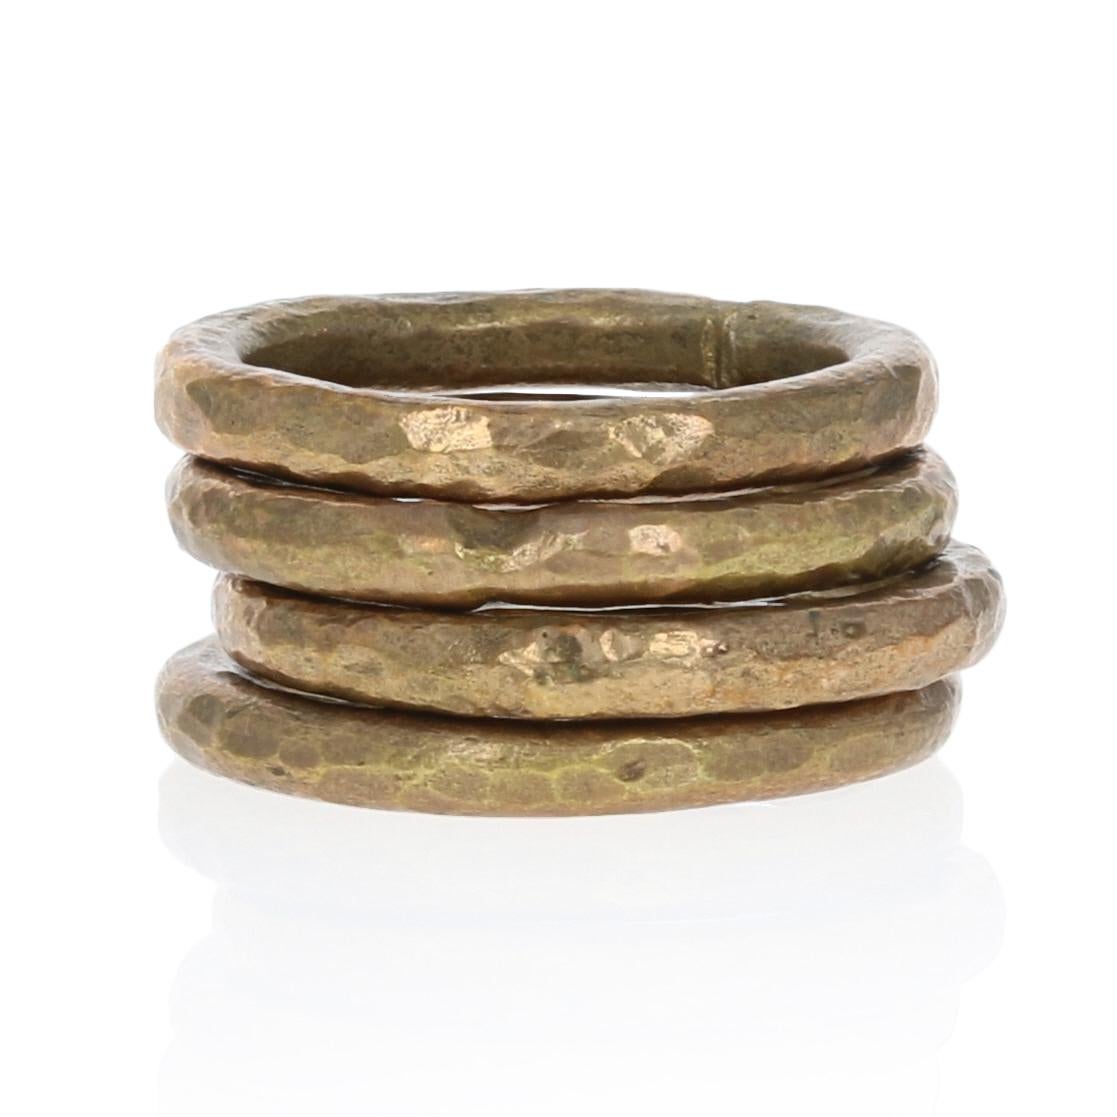 Brand: Ashley Pittman
Metal Content: Bronze

Rings:
Quantity: 4
These rings are a size  6 3/4 - 7. 
Face Height (north to south): 1/8